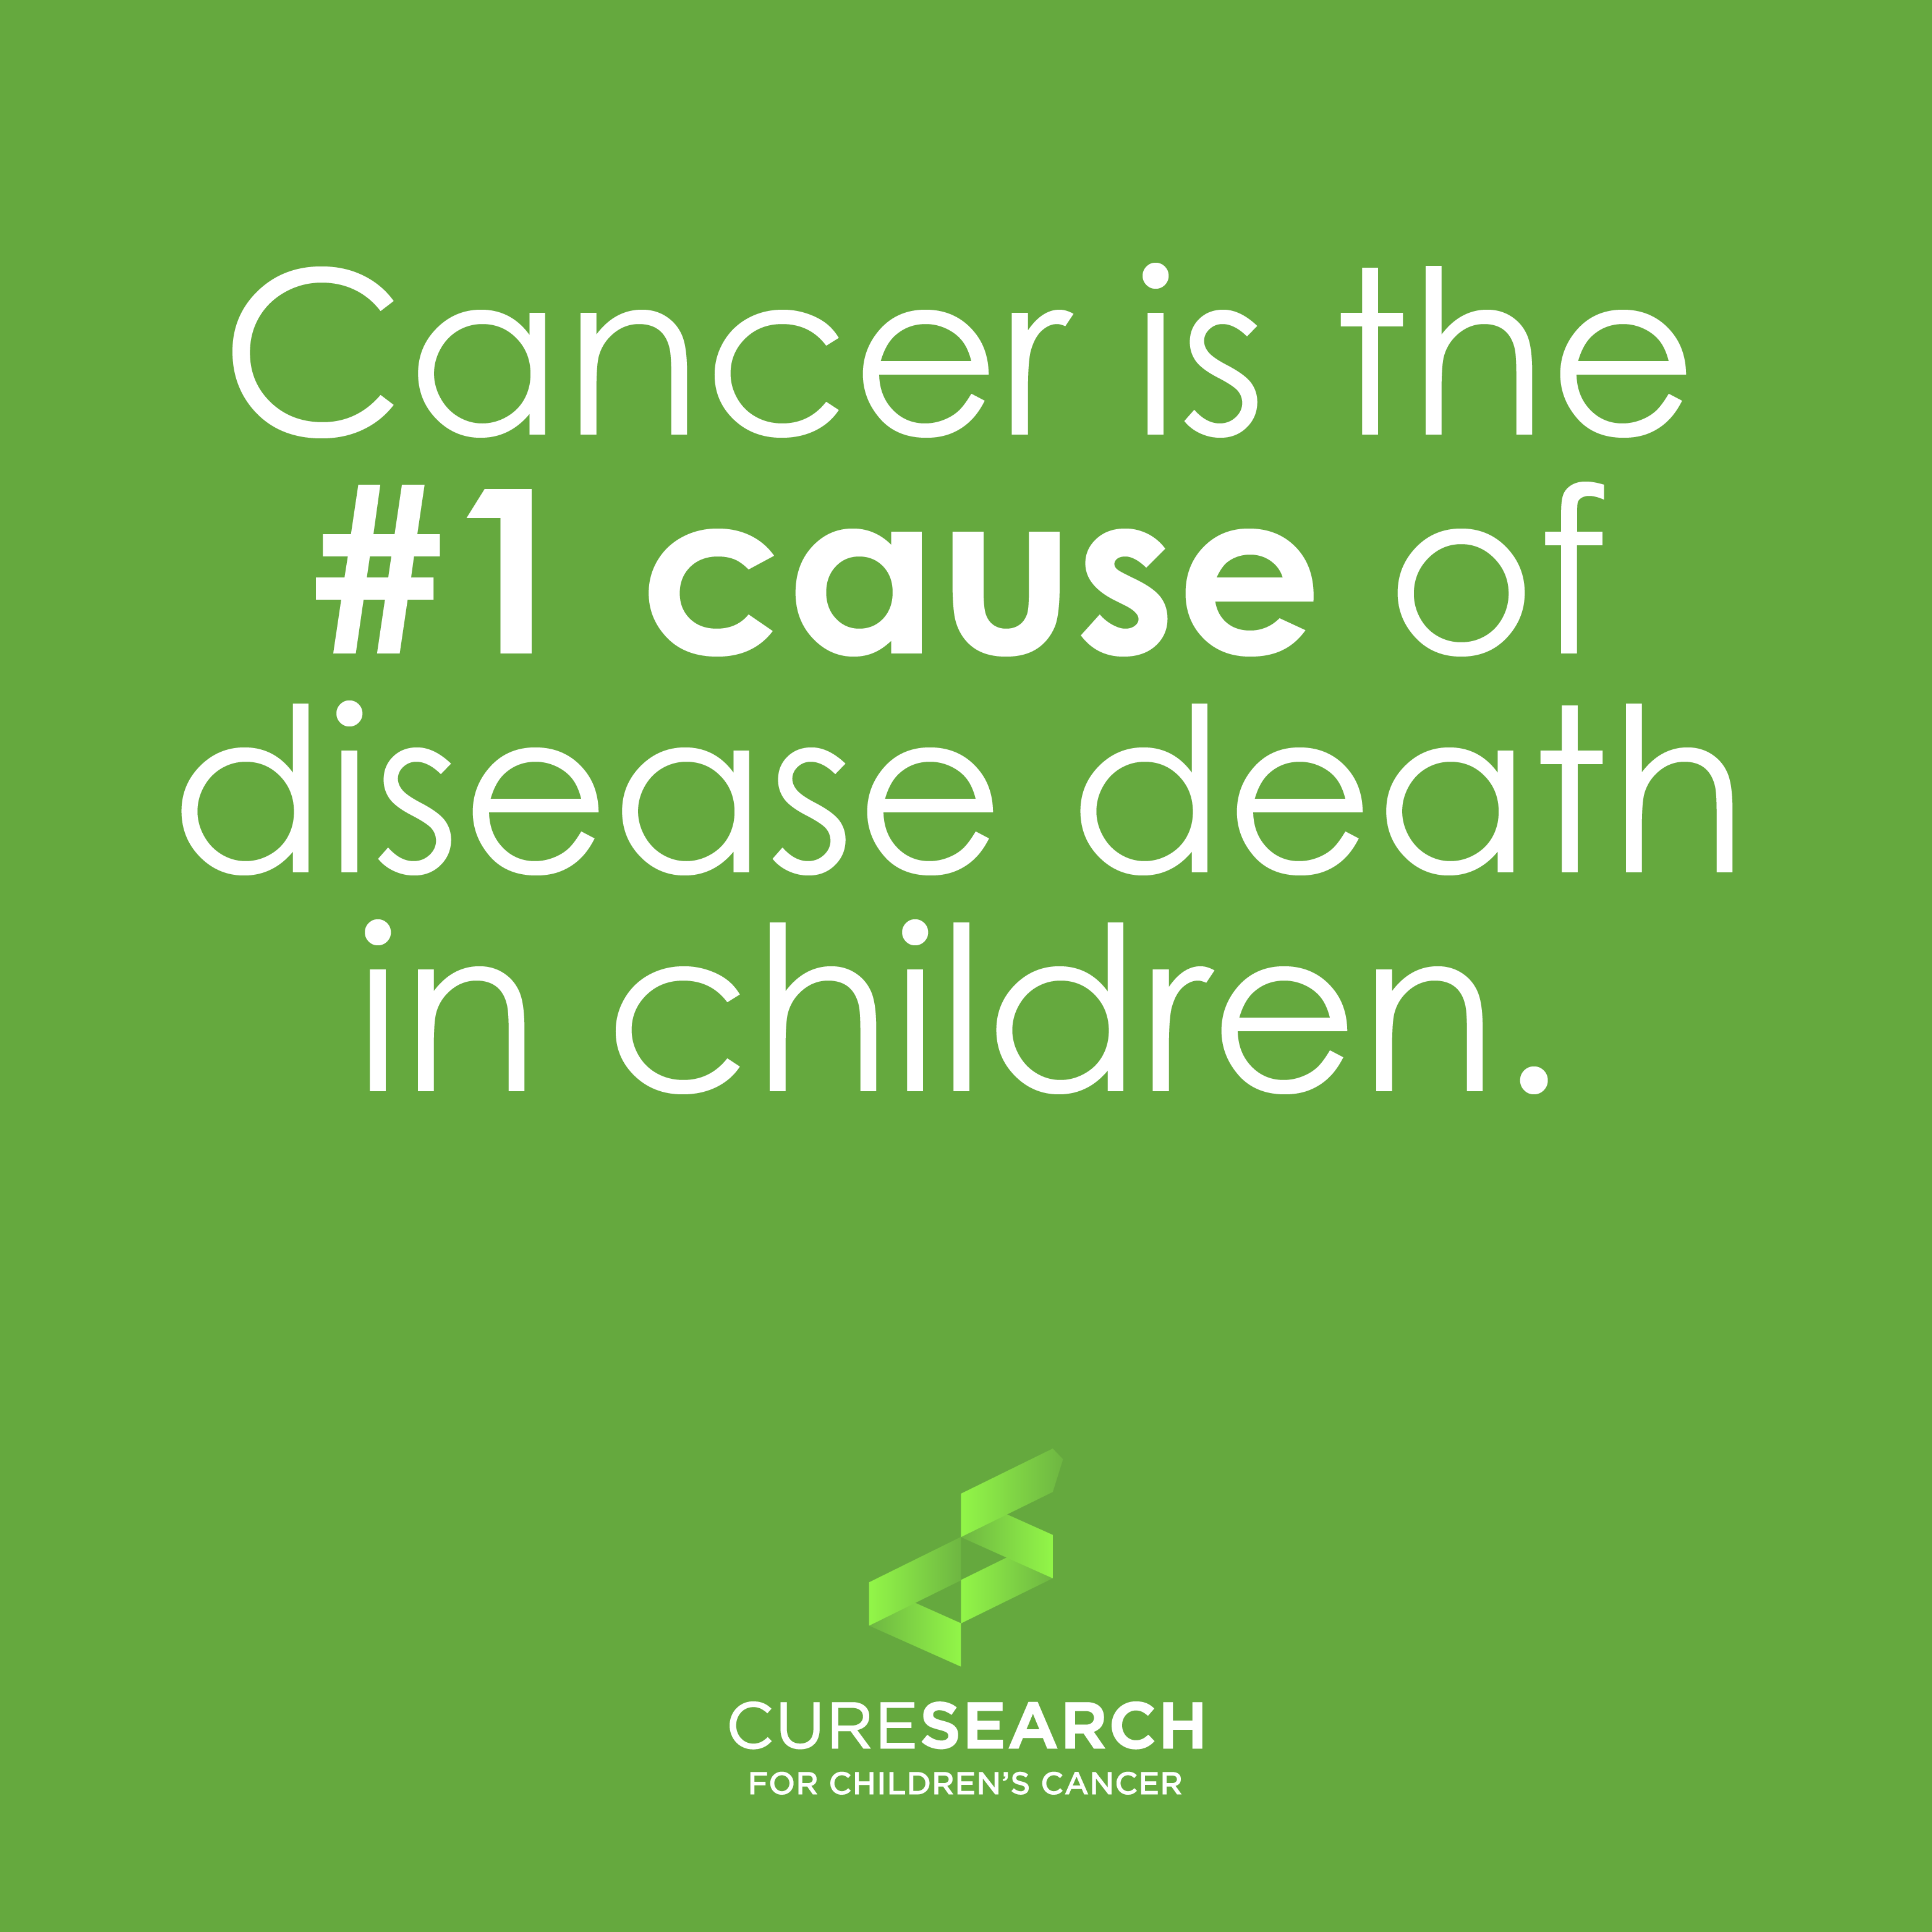 Childhood cancer stats- Cancer is the #1...